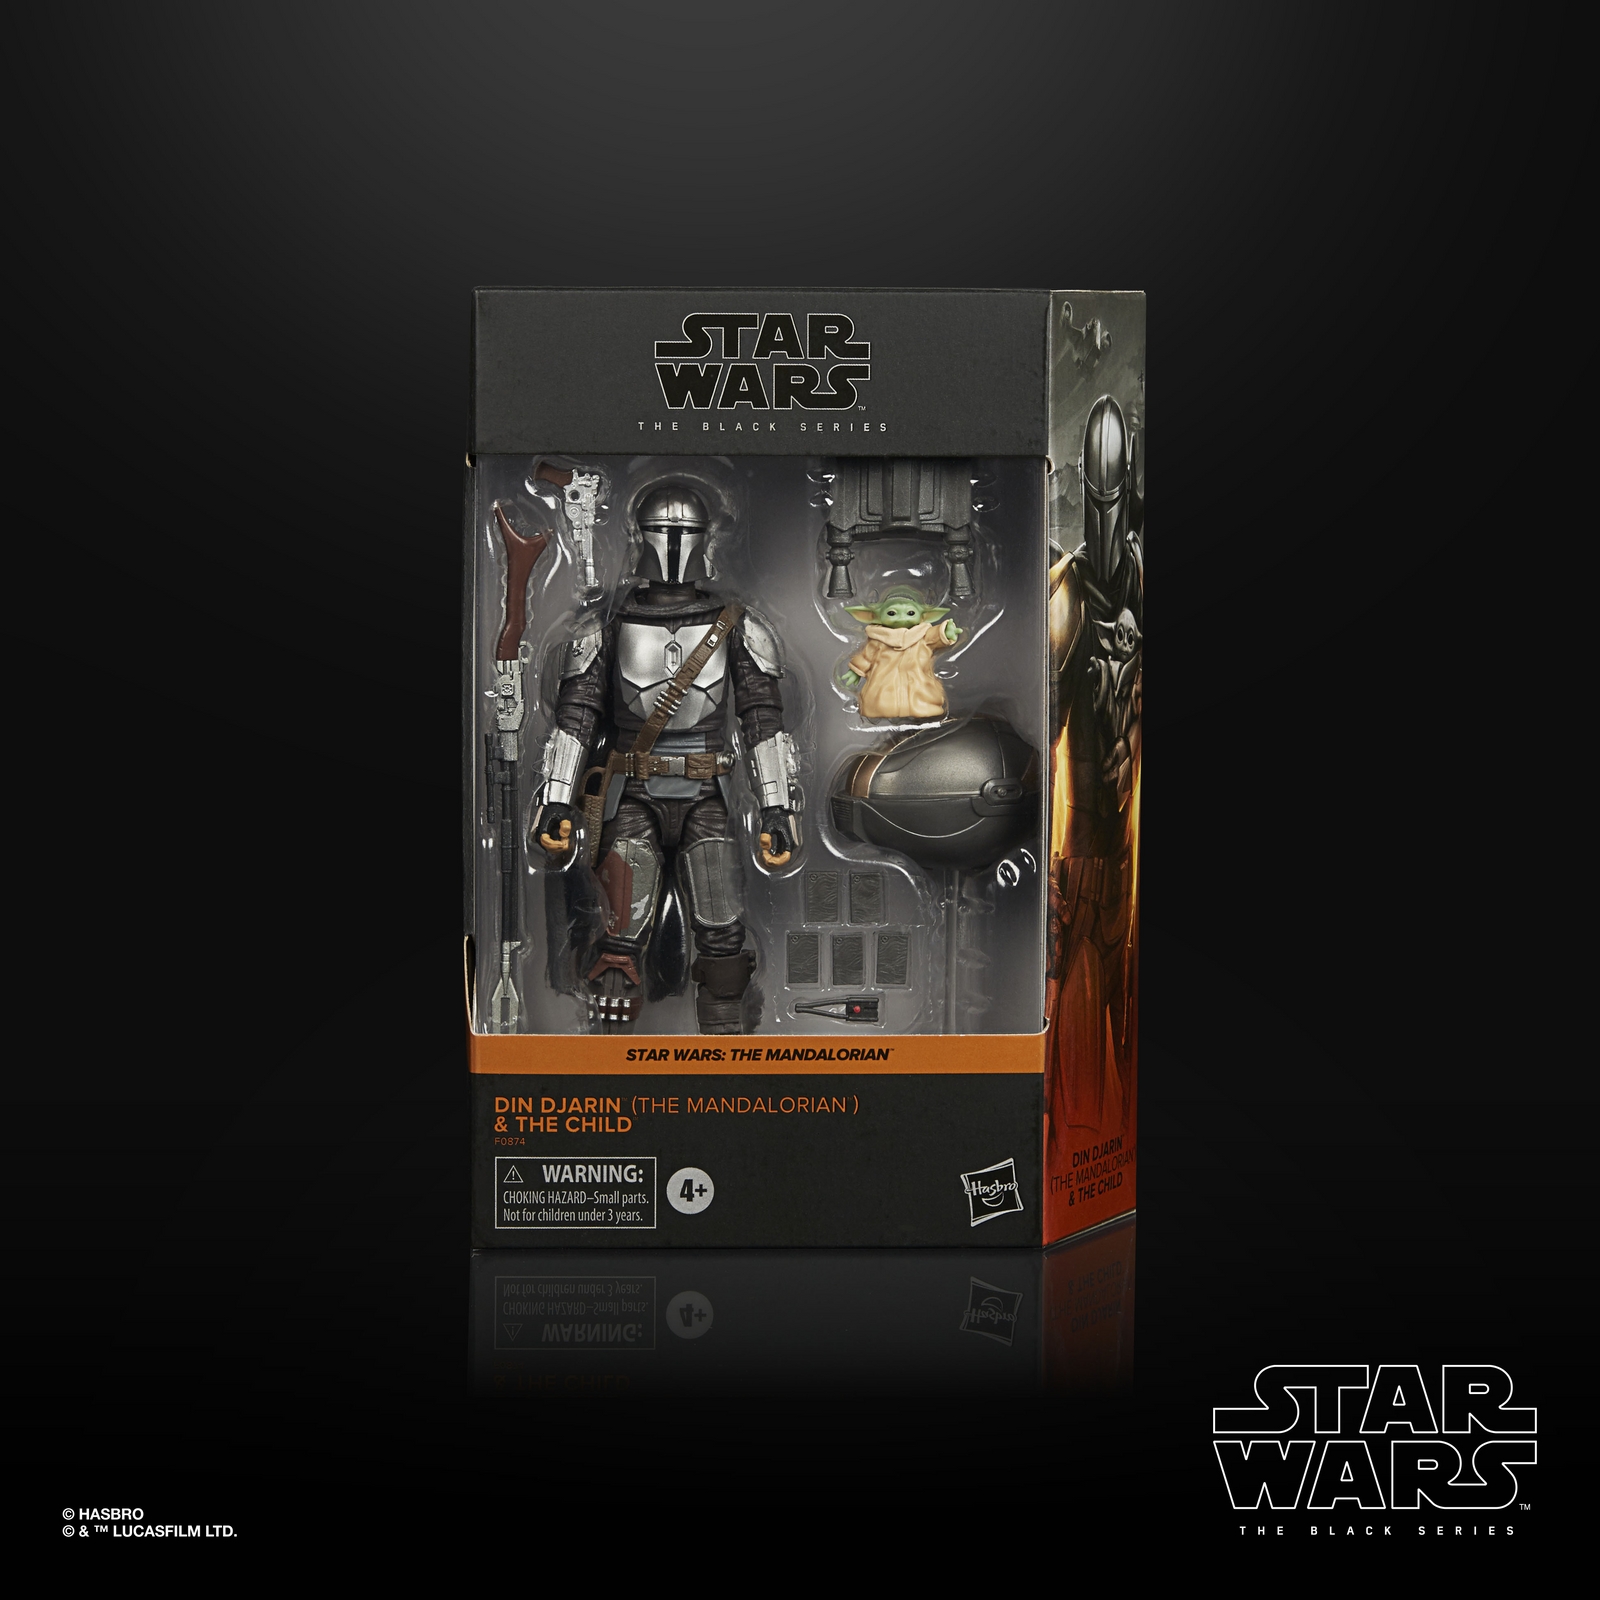 STAR WARS THE BLACK SERIES 6-INCH DIN DJARIN (THE MANDALORIAN) & THE CHILD BUILD-UP PACK - in pck (2).jpg